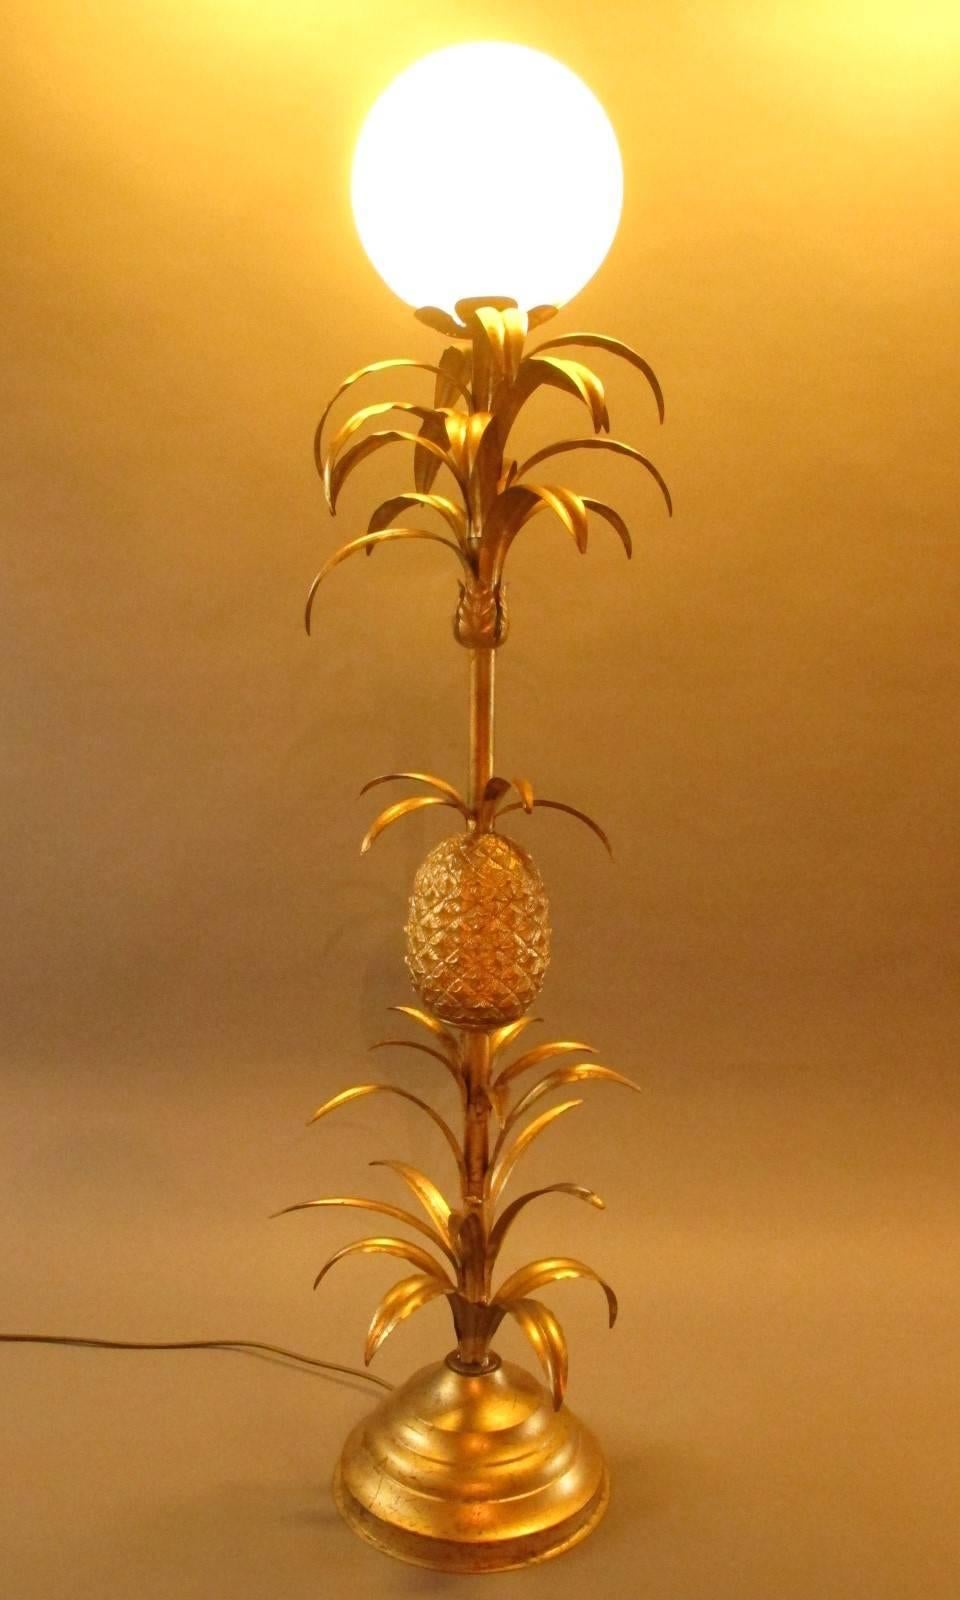 Mid-20th century palm lamp with pineapple from the 1960s. In brass, with fine painted metal leaves and a big pineapple. On the top a big white frosted glass globe.